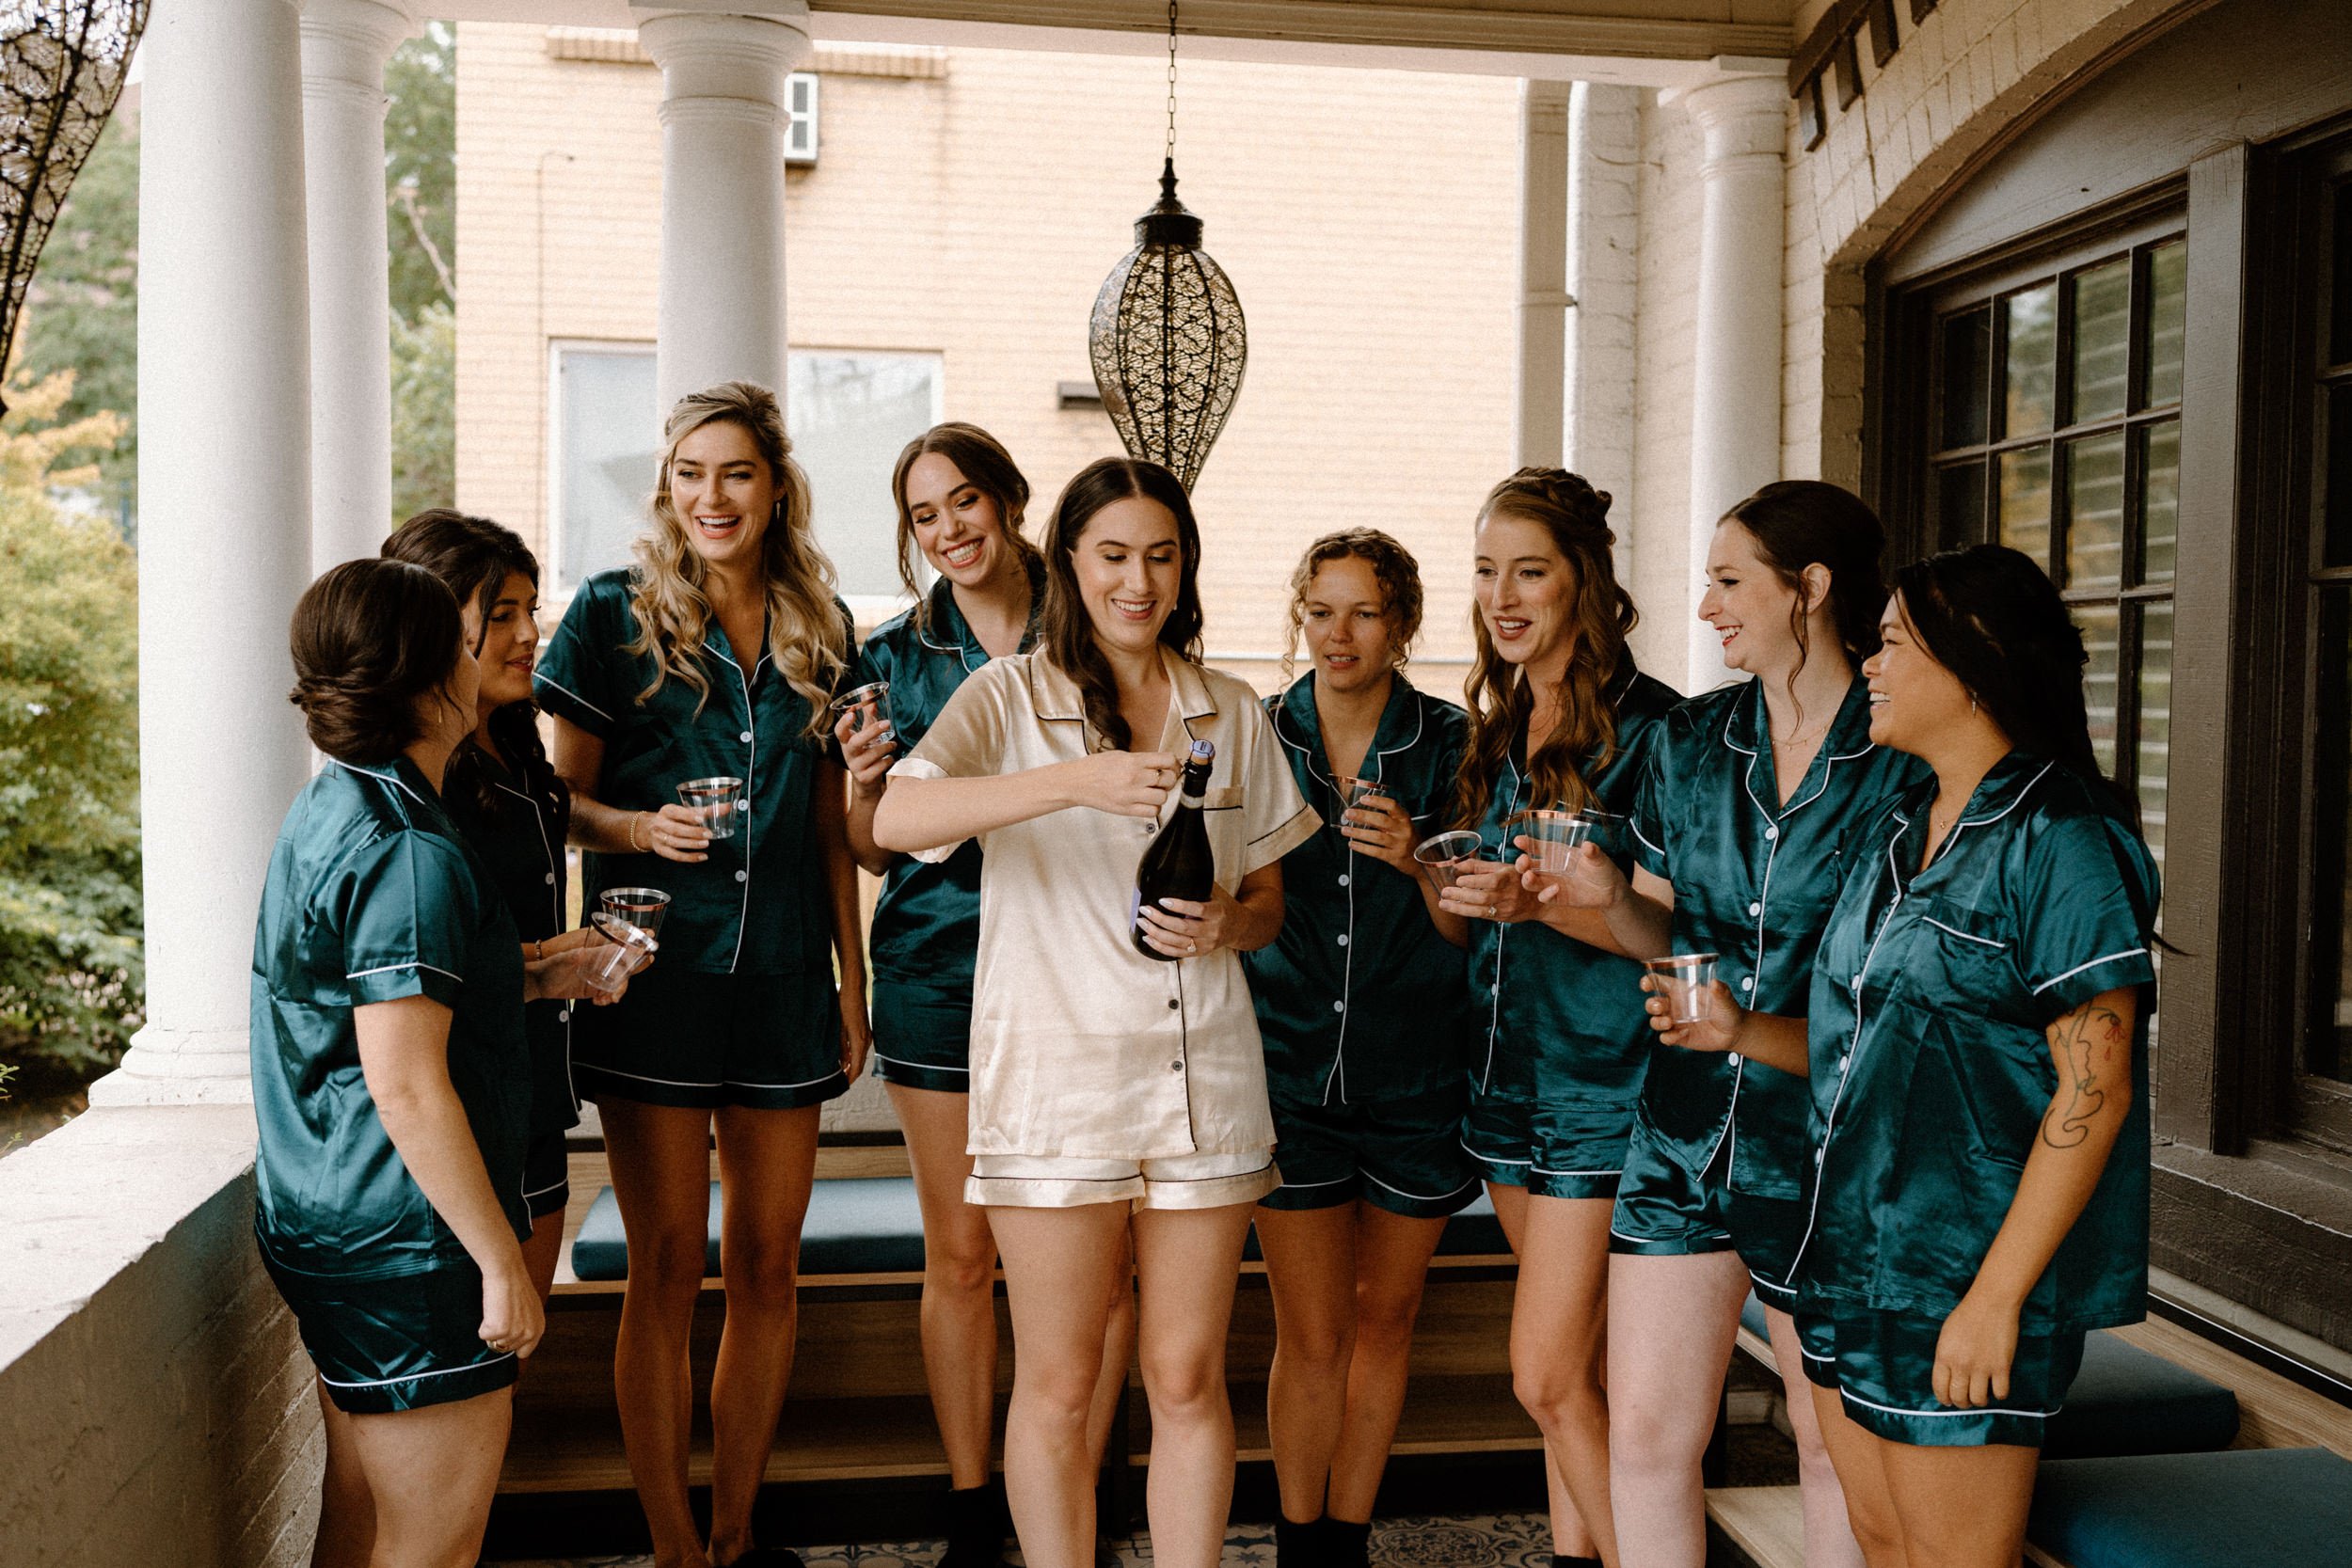 The bride opens a bottle of champagne with her bridesmaids while getting ready